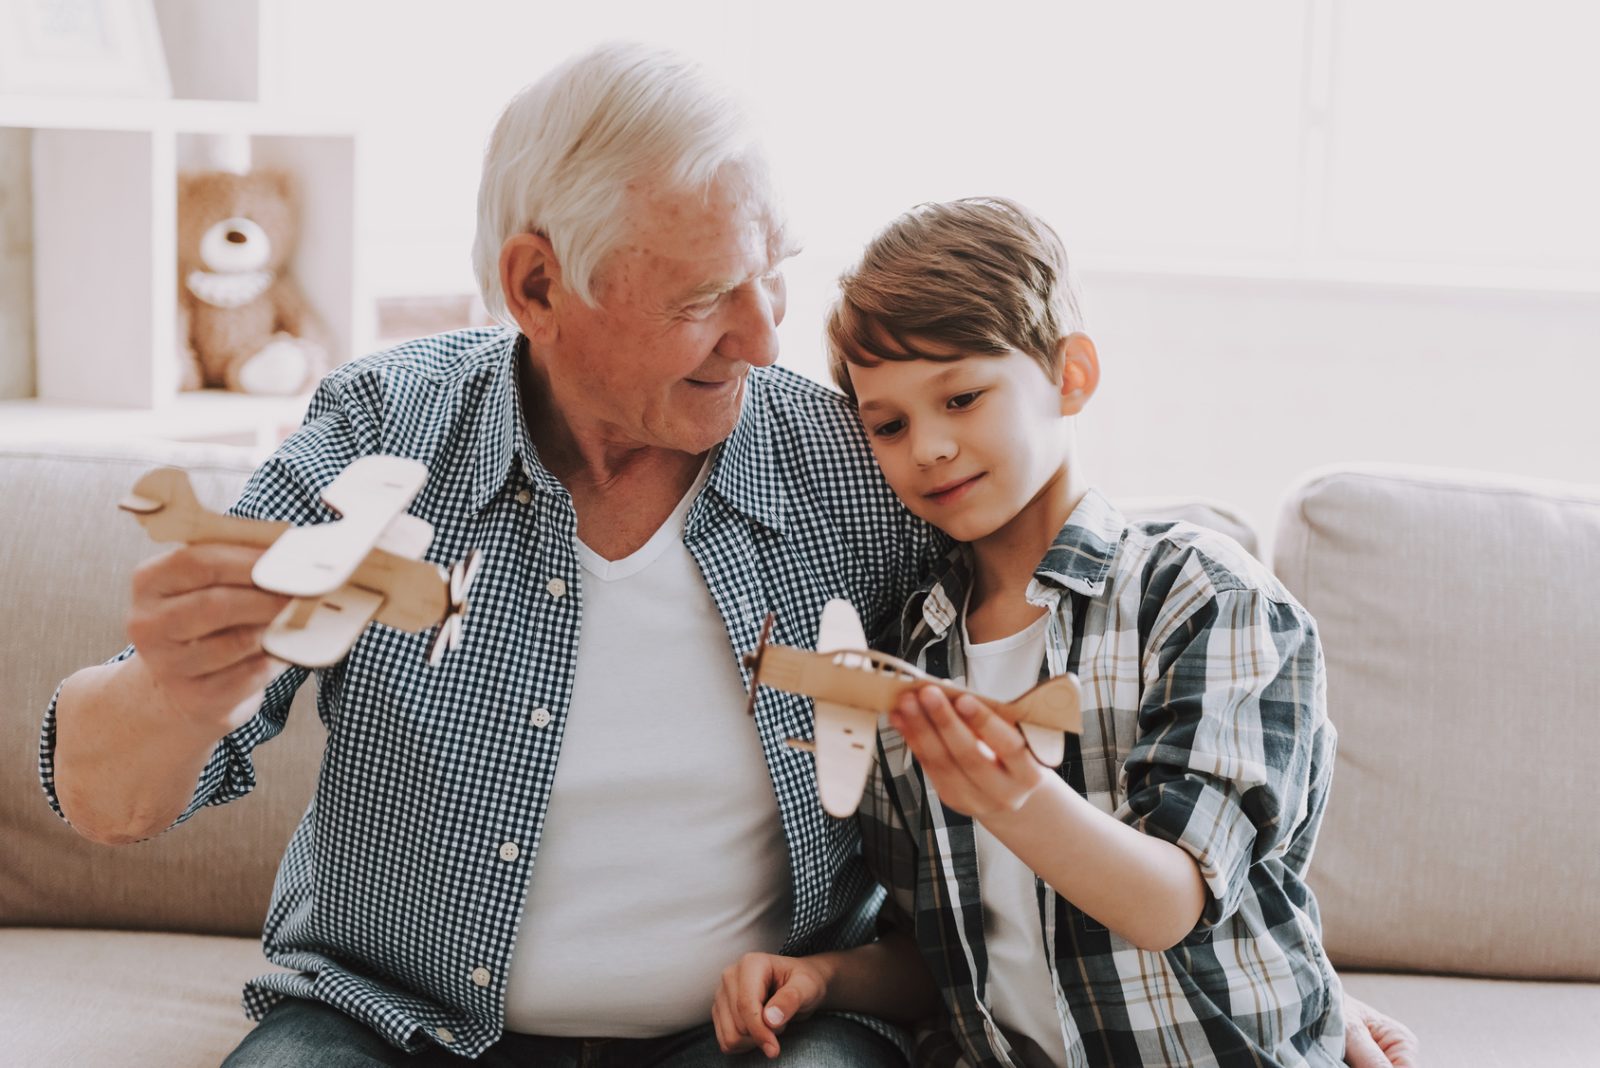 Grandparent Visitation? Other family or friend visitation? What are my rights as a Minnesota citizen to see a loved one’s child?